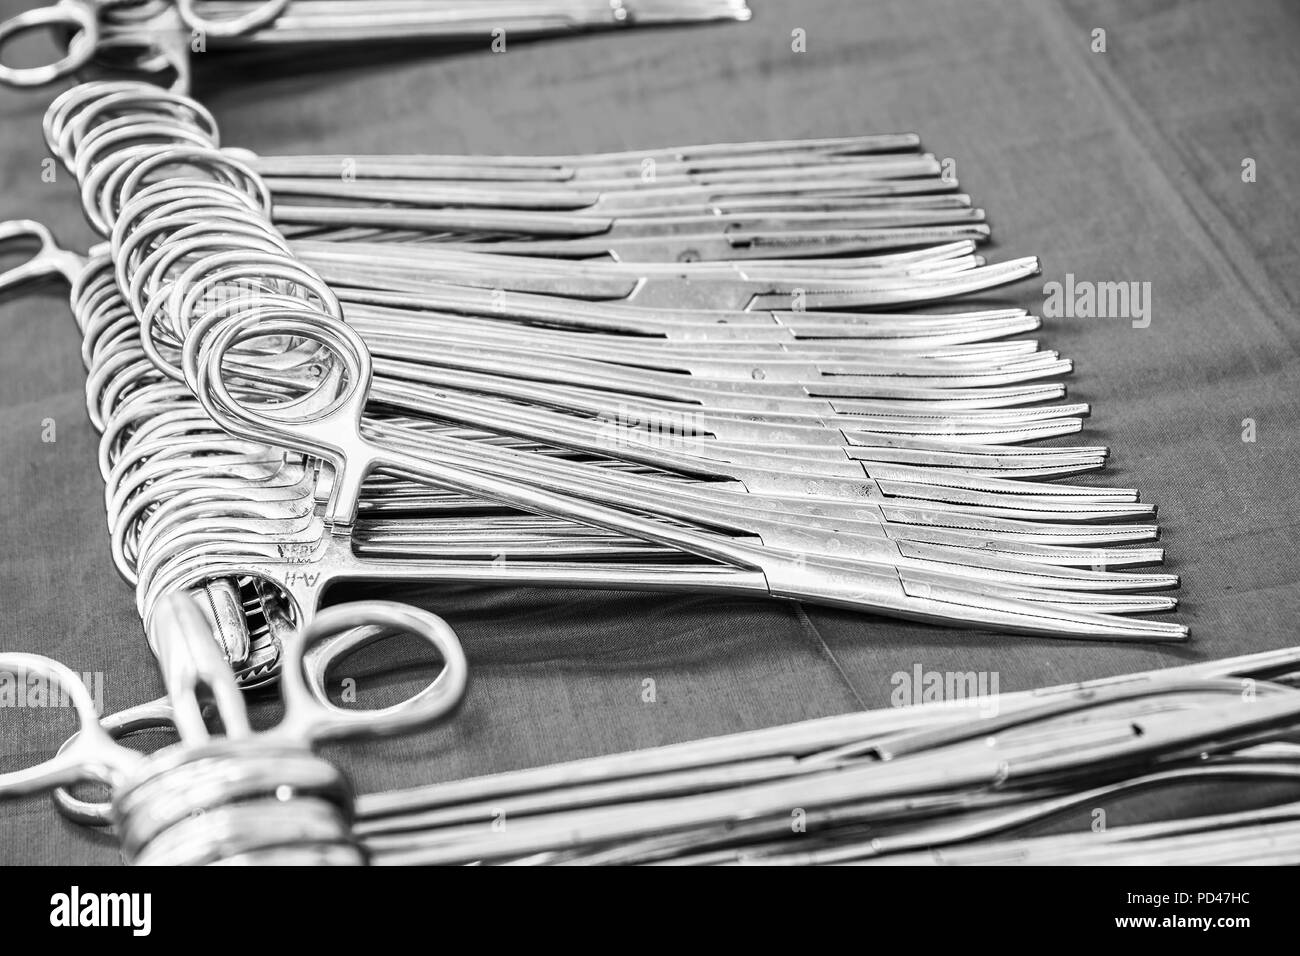 Sterile surgical instruments on the table. Forceps Stock Photo